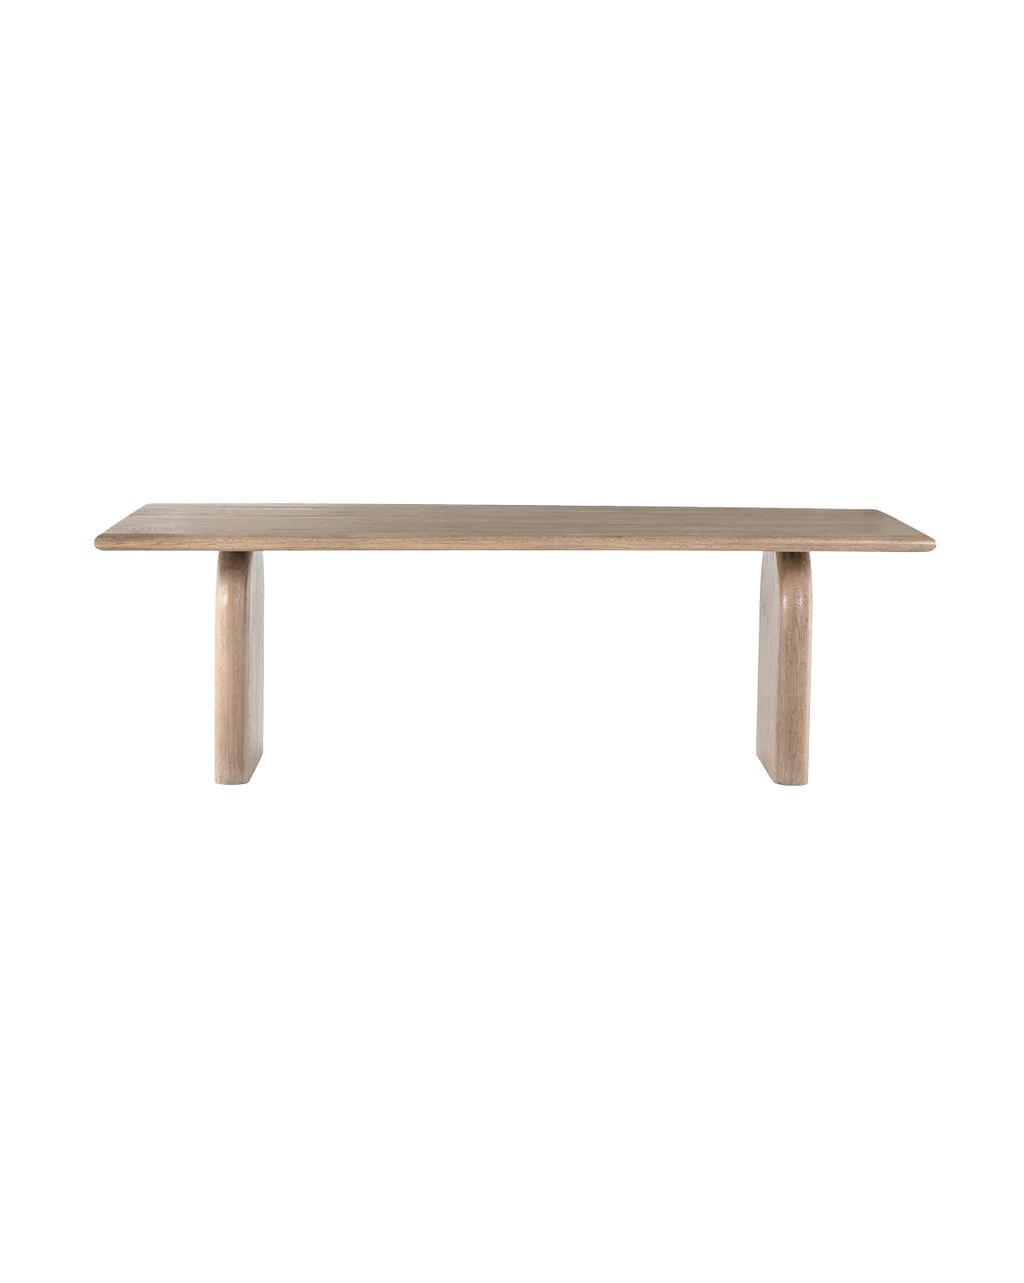 Delamotte Dining Table | McGee & Co.